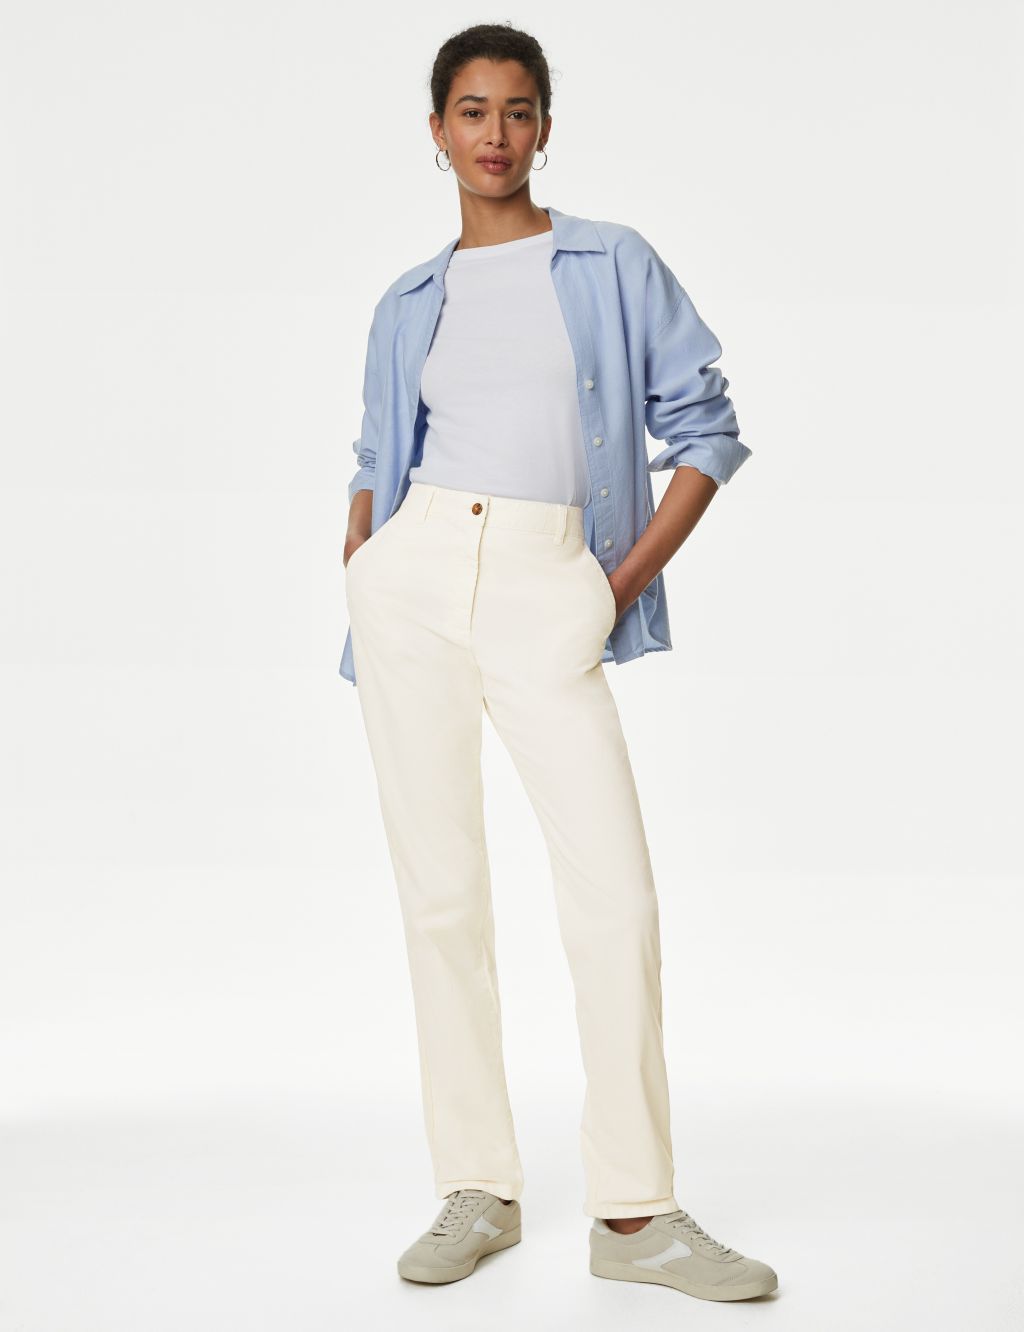 Sale & Clearance White Women's Casual & Dress Pants